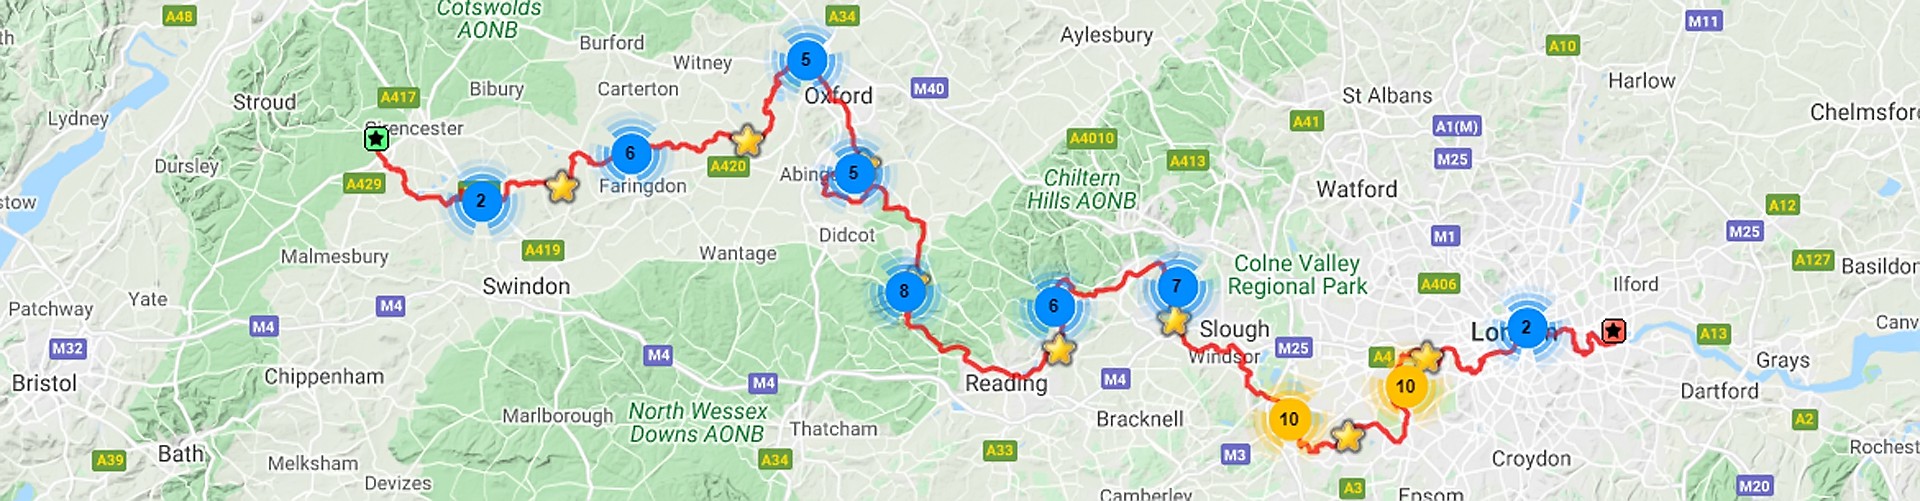 Virtual challenges are ideal for charity and fund raising events, with live results and real-time Google maps